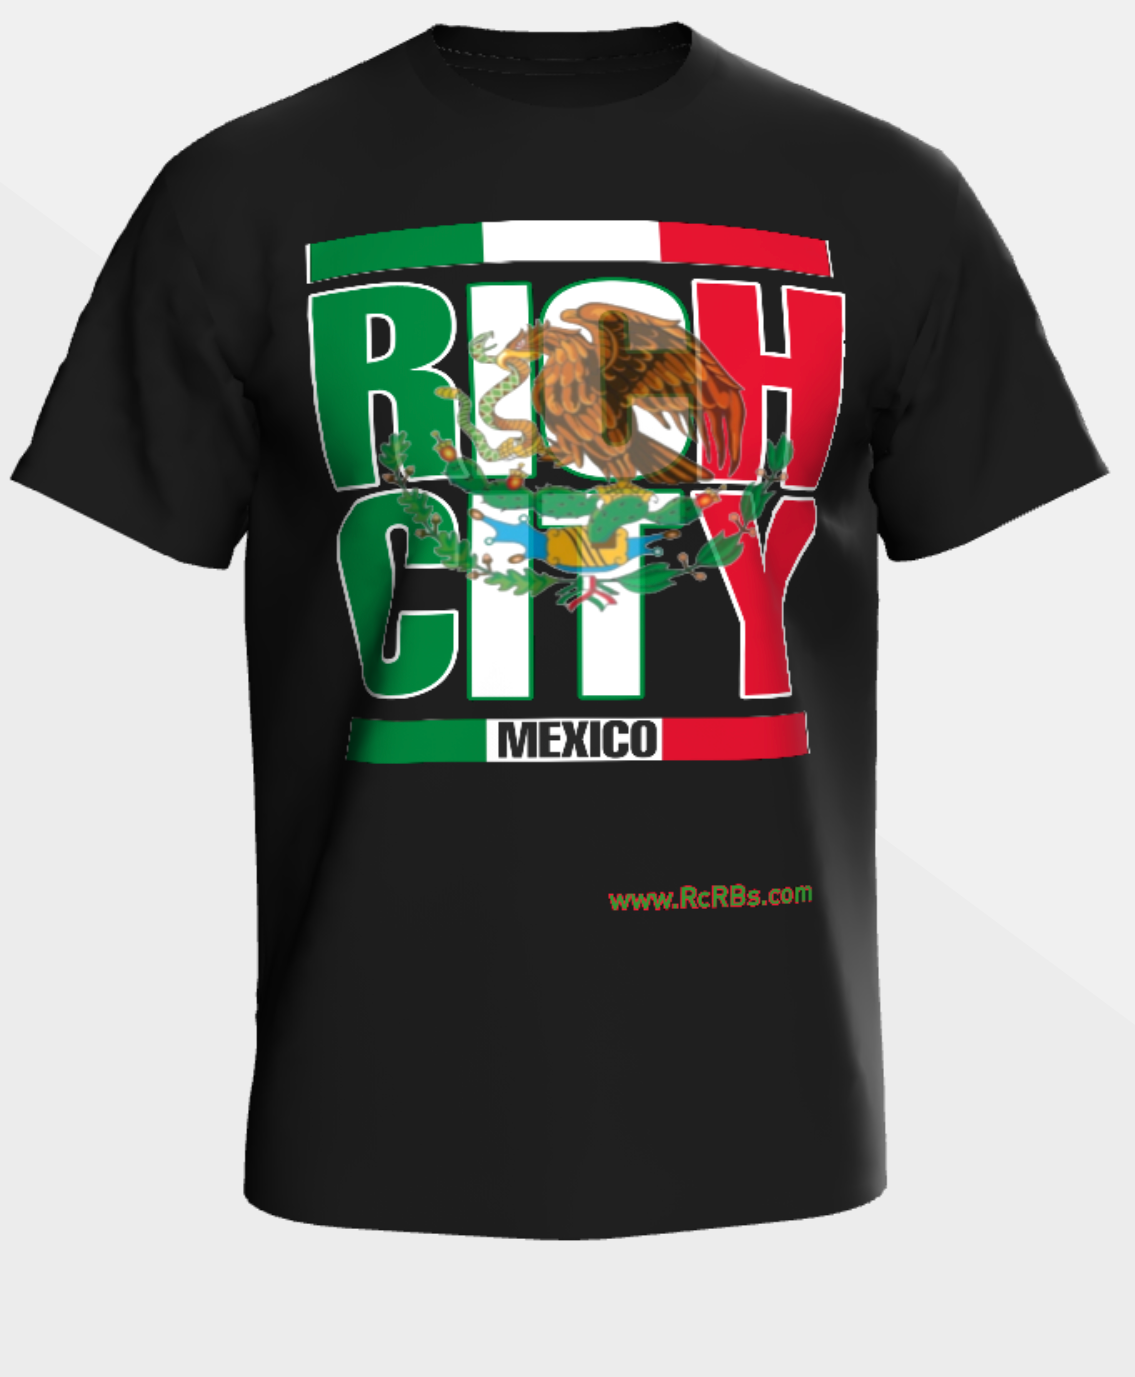 "Evry1's Brand"RichCity Rides Bike/Skate Cooperative -"Mexico"- Sustainable Clothing Collection